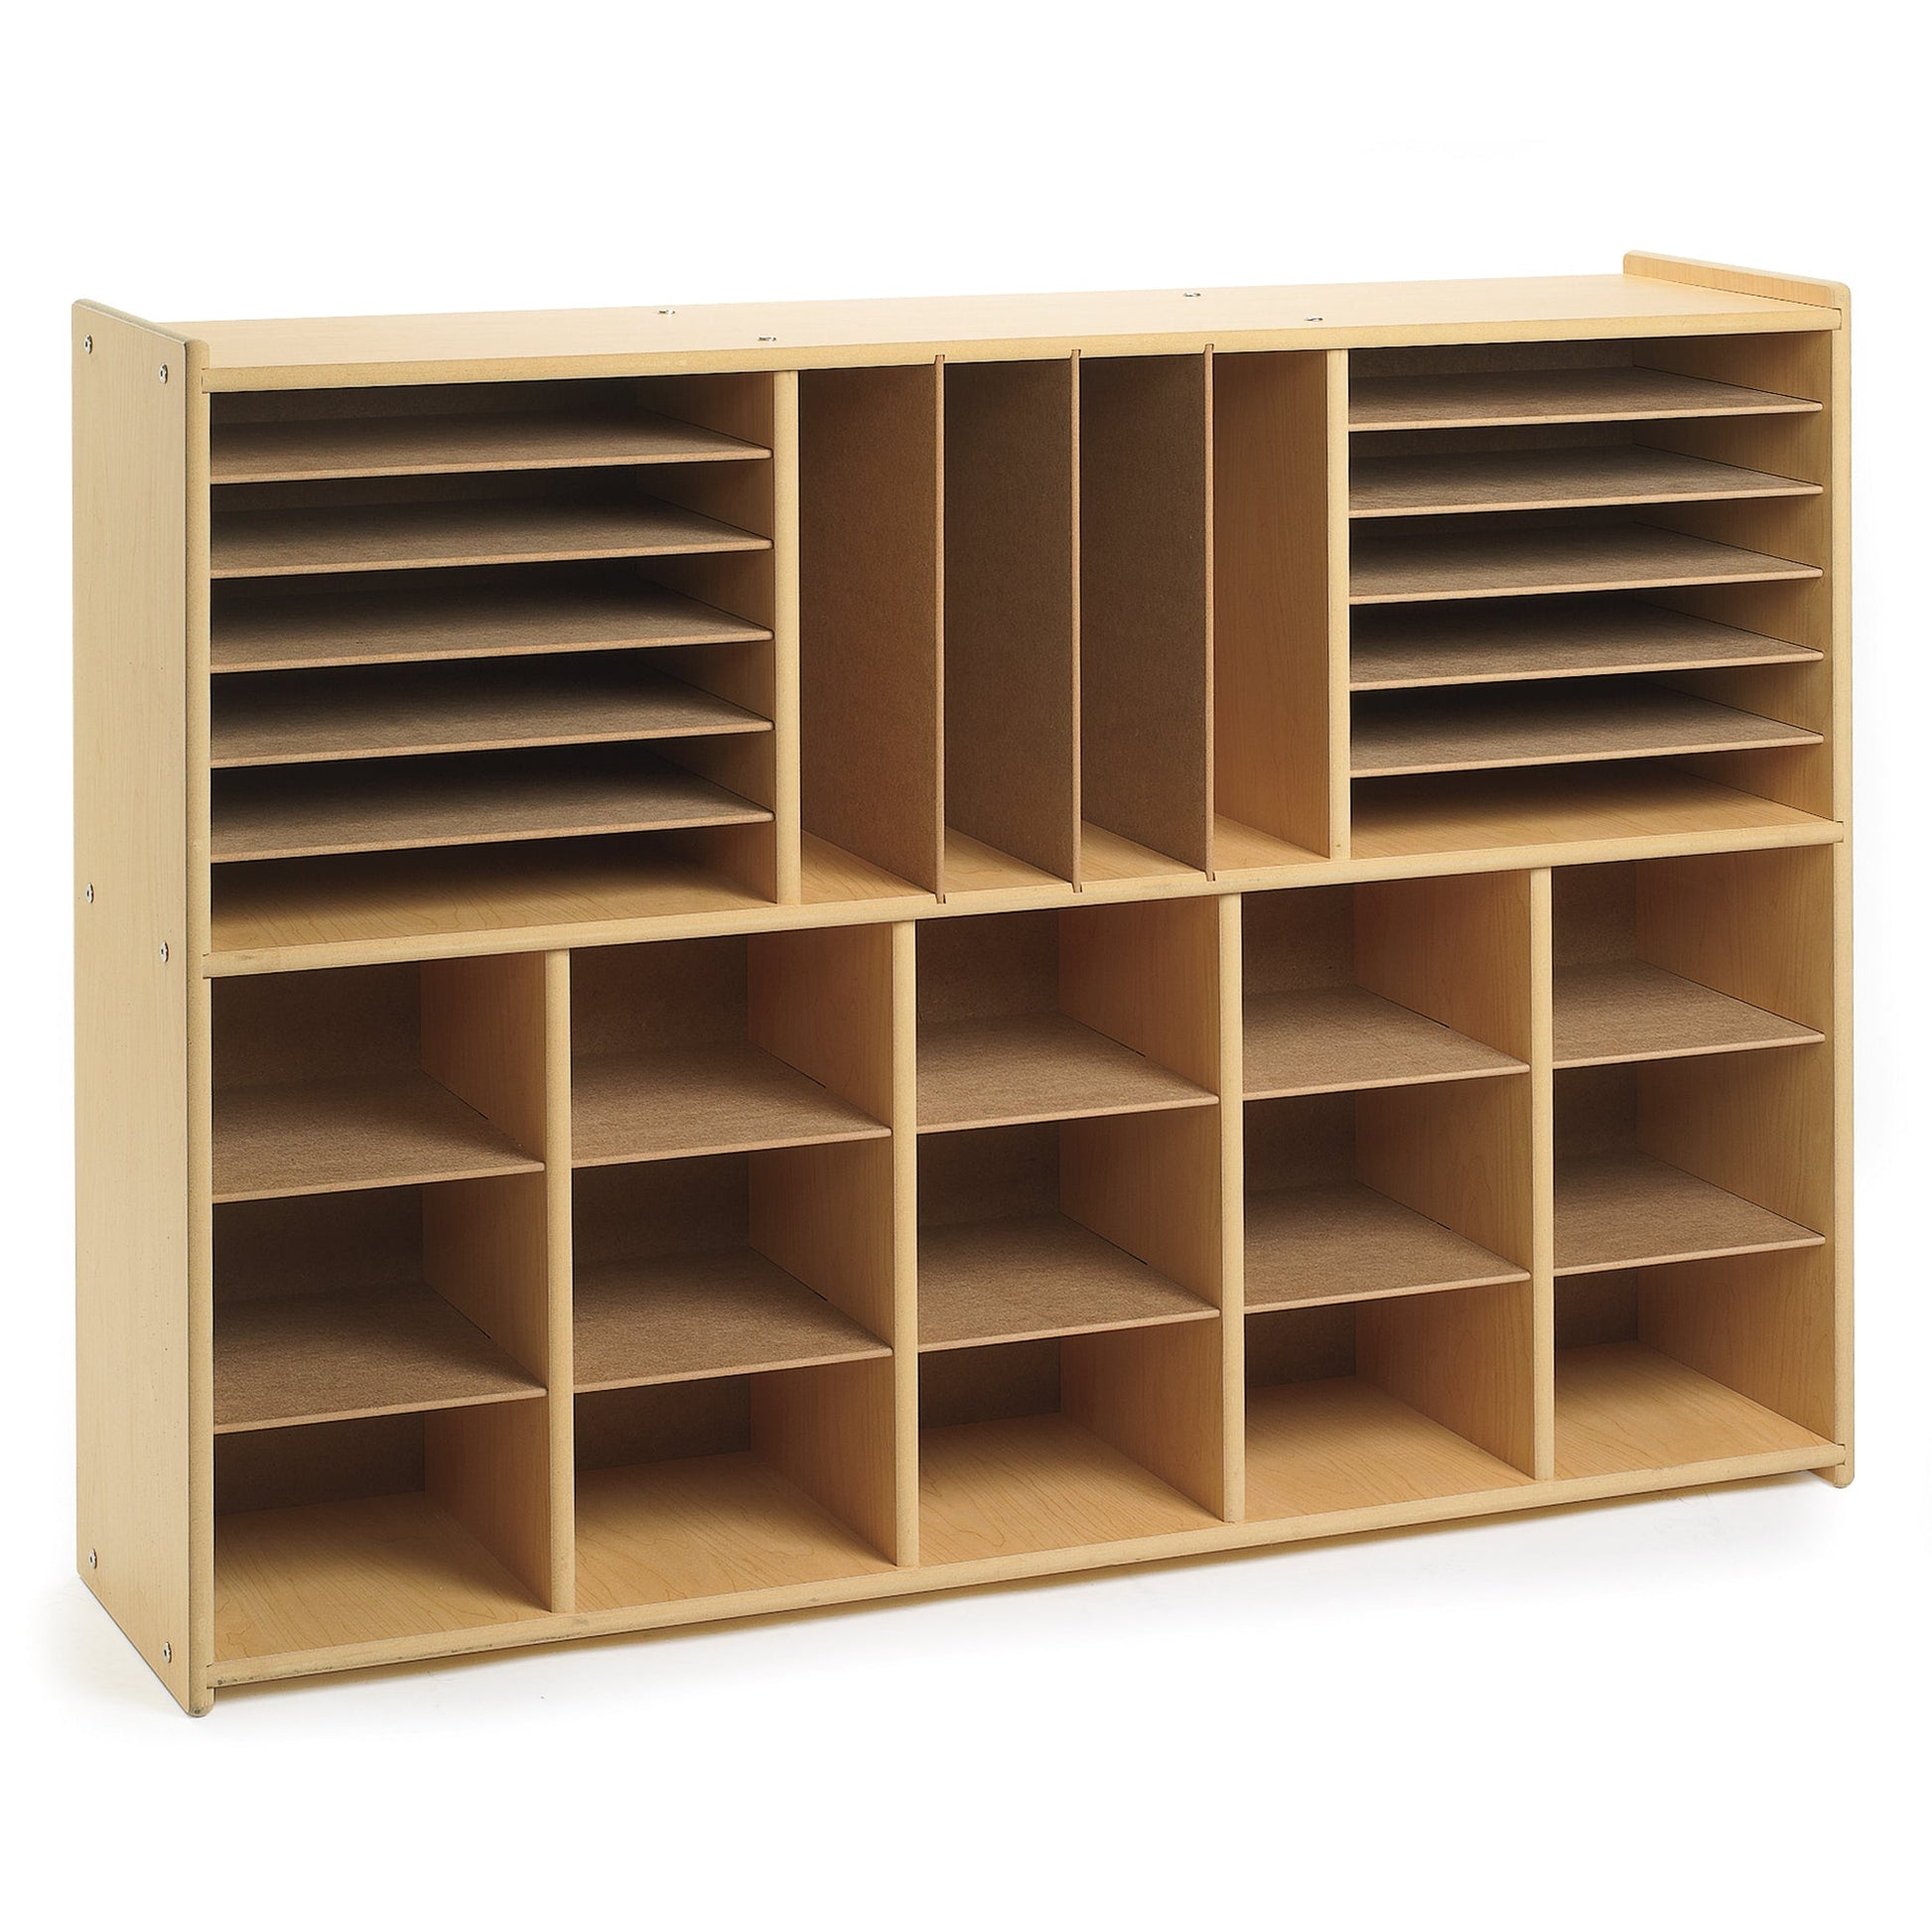 Angeles Value Line Multi-Section Tray Storage - Unit Only - 48"L x 12"W x 36"H (ANG7172) - SchoolOutlet